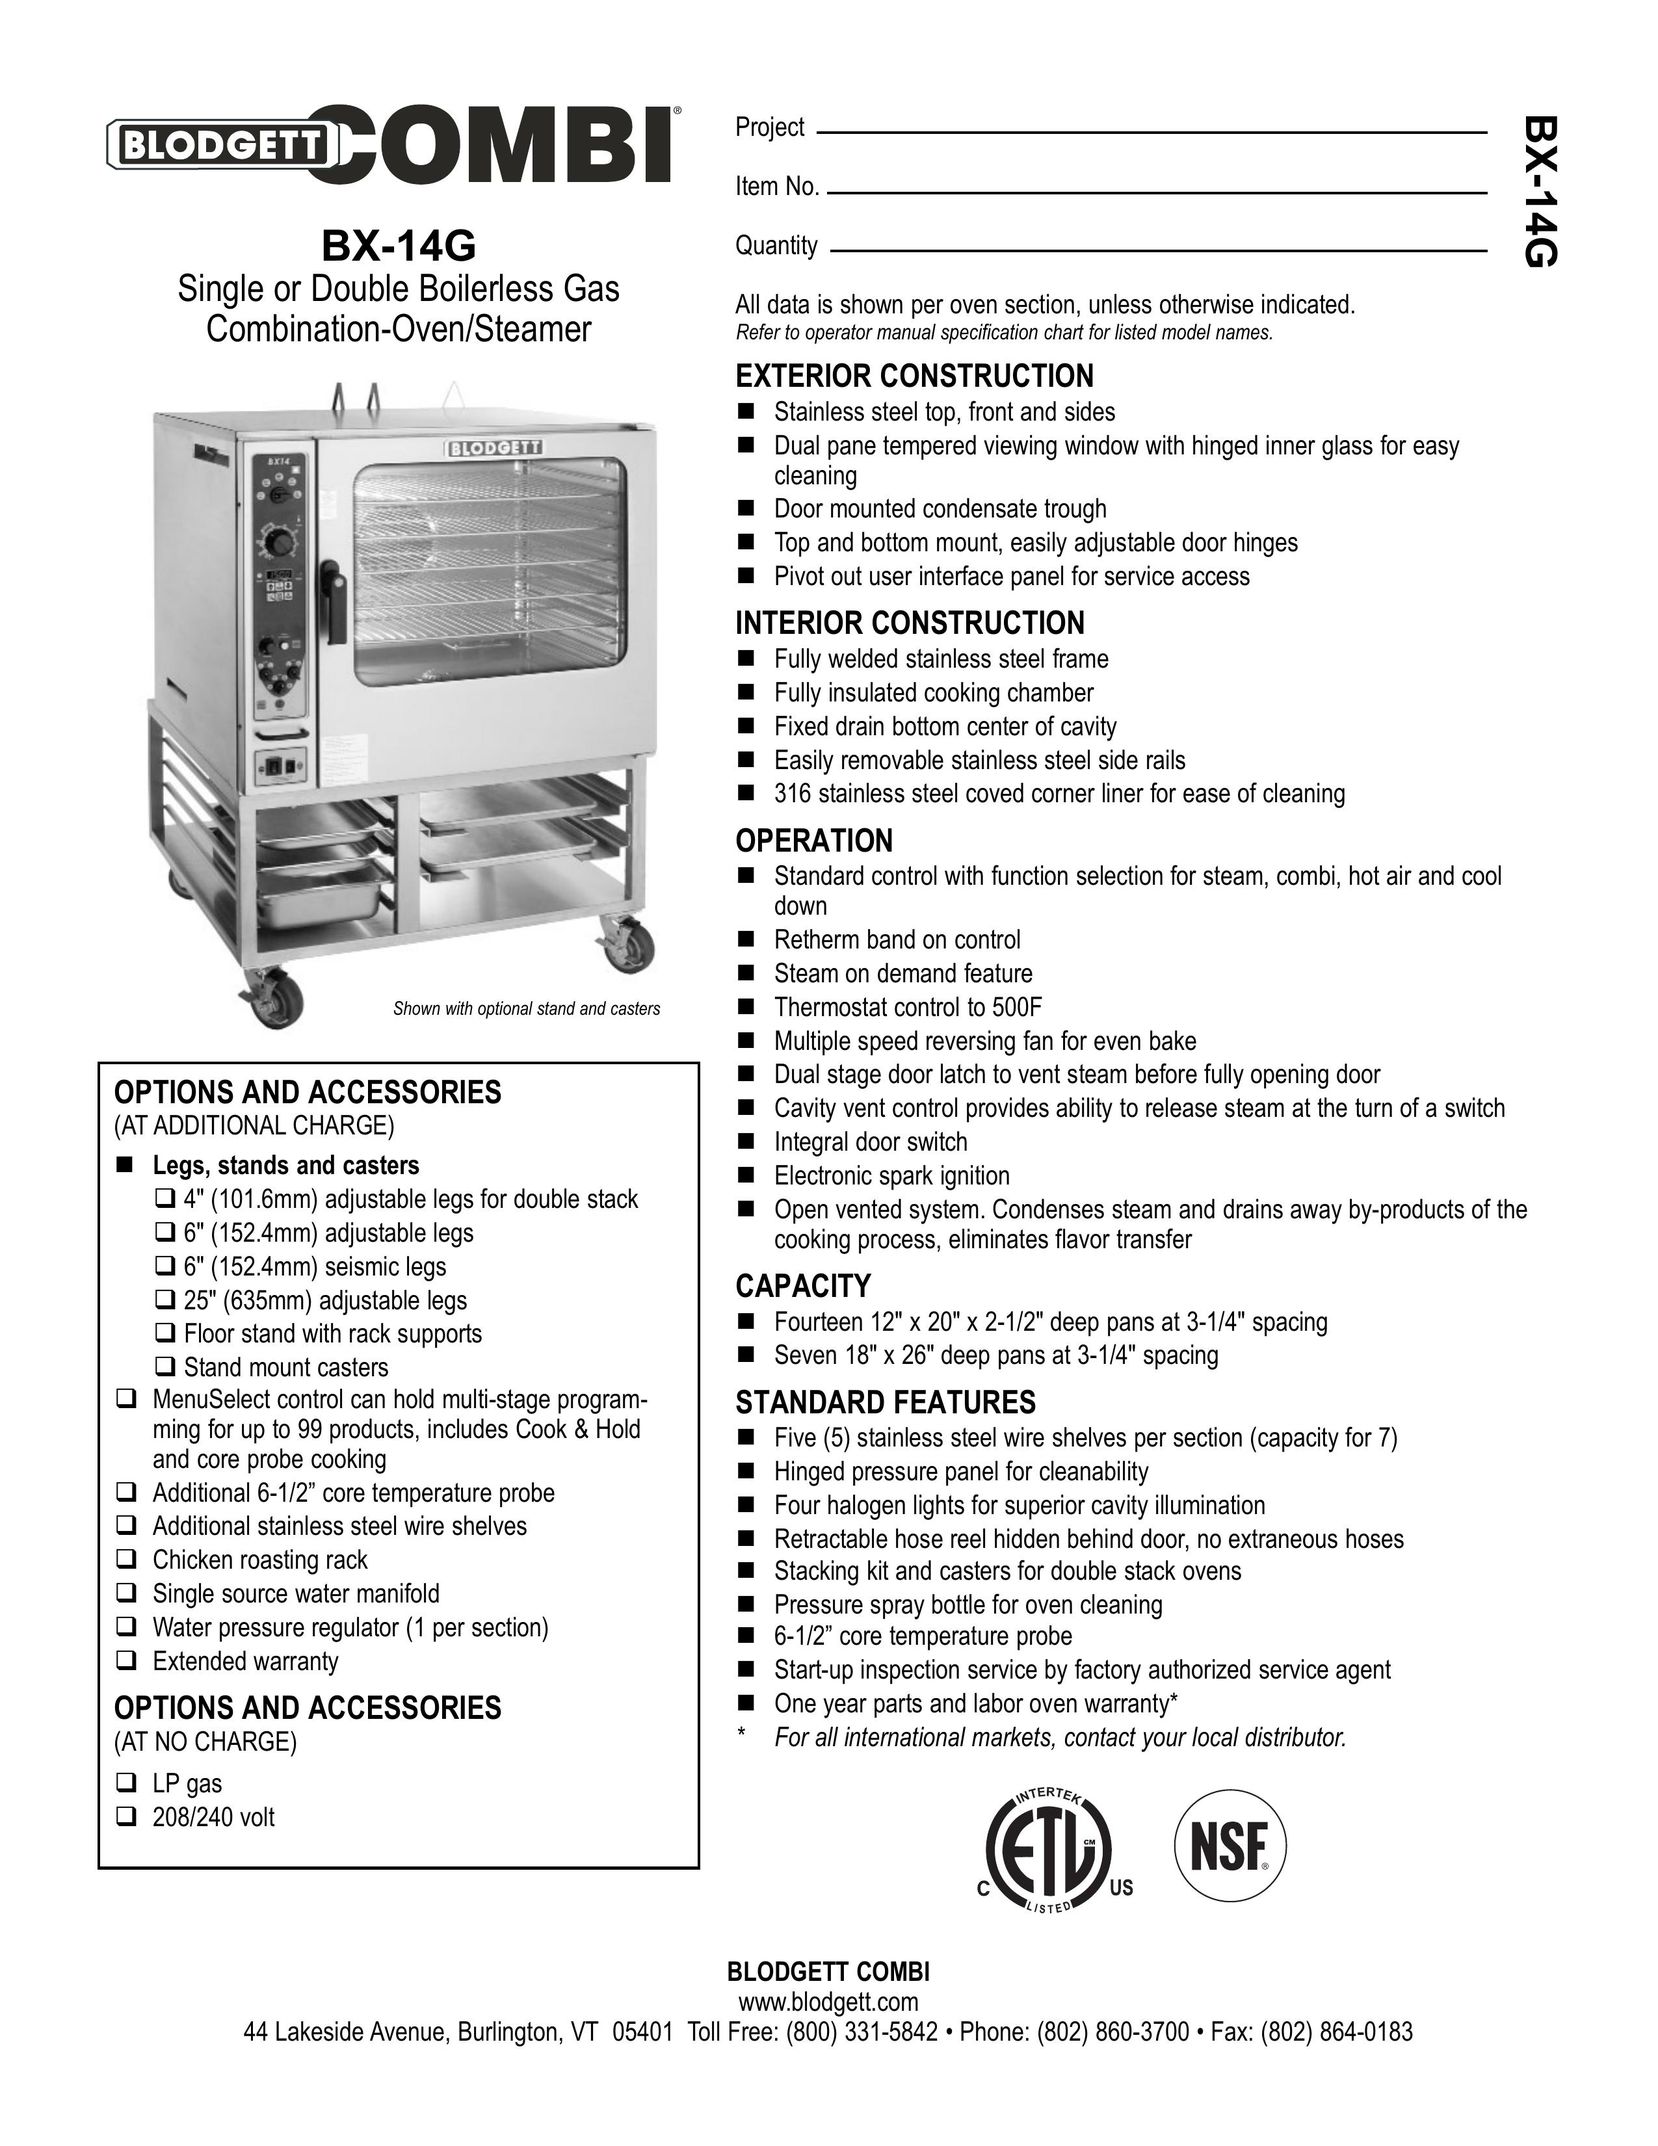 Blodgett BC-14G Convection Oven User Manual